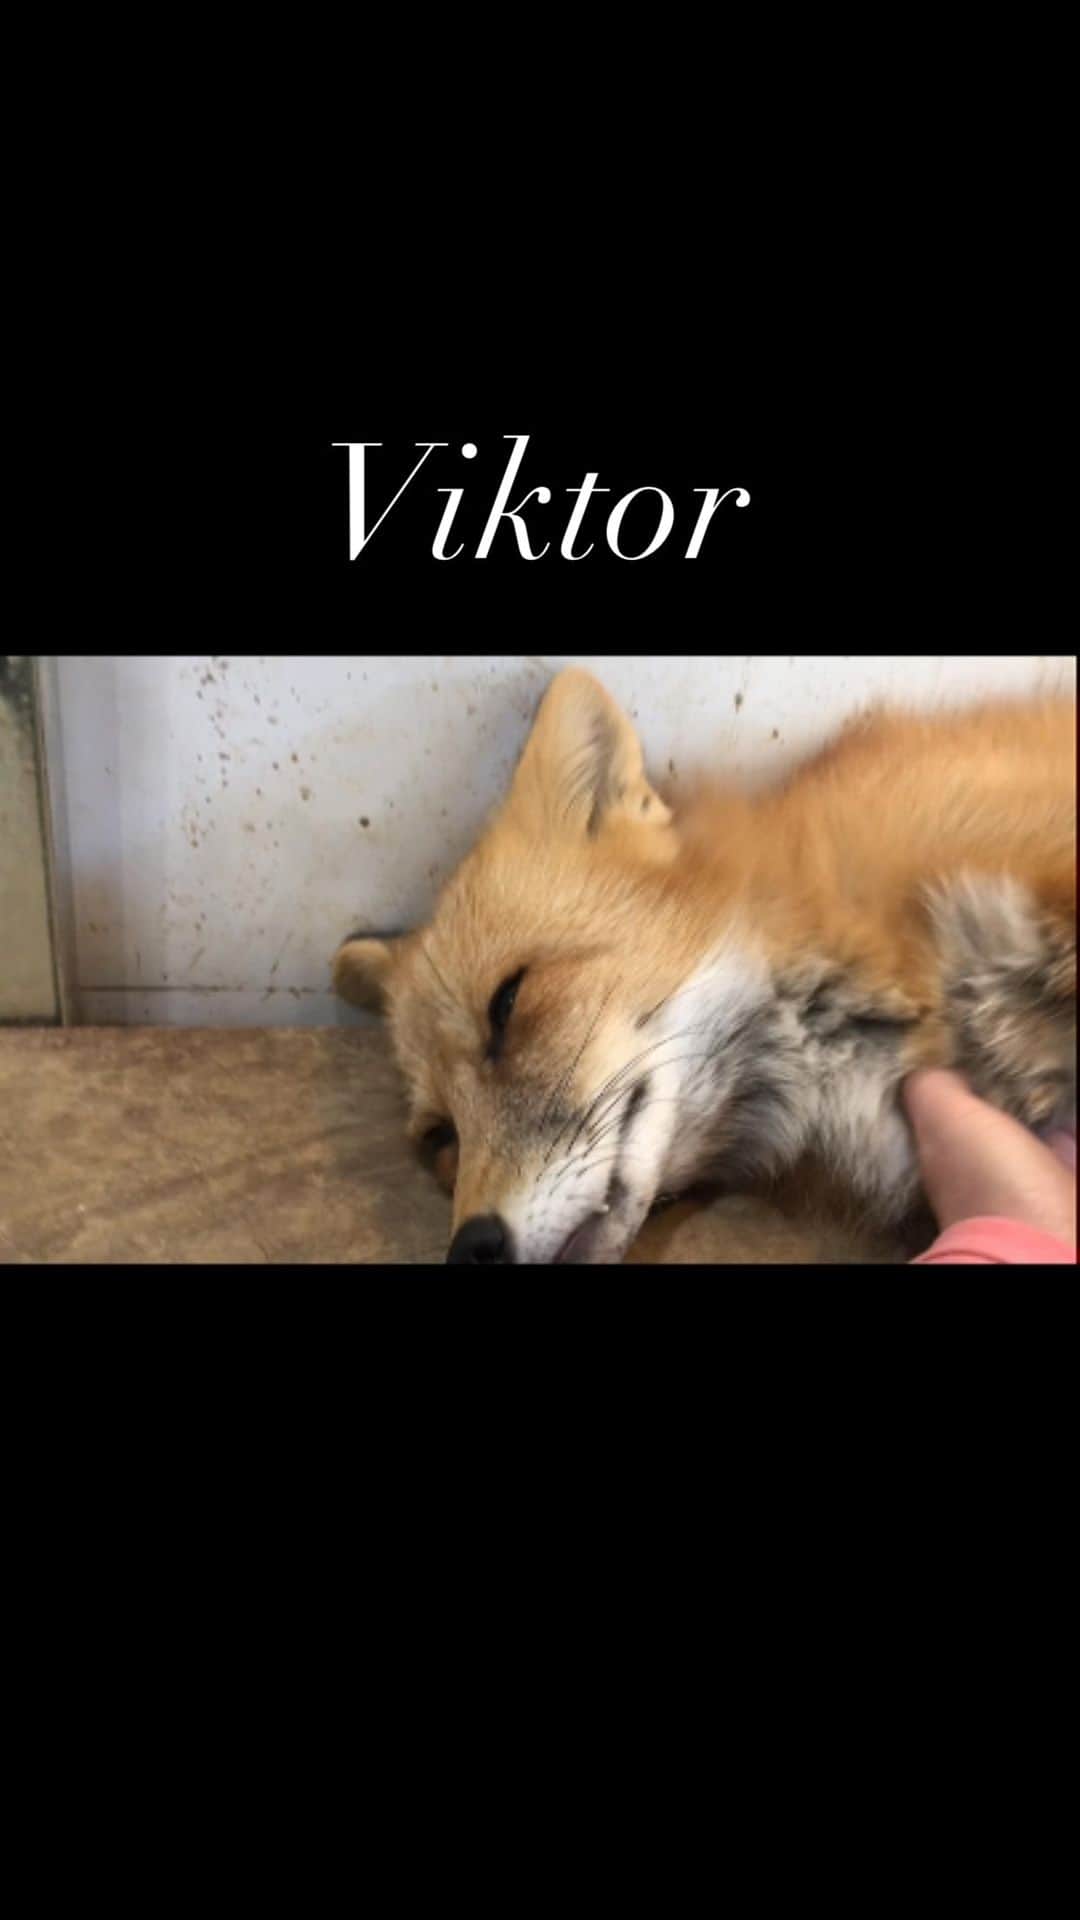 Rylaiのインスタグラム：「Morning scritches with Viktor!  . Schedule an encounter and you too can give Viktor love!!  . #privateencounters #foxes #animals #animal #animallovers #foxesofig #russiandomesticatedfoxes #viktor #redfox #ambassador #sandiego #volunteer #local #nonprofit #socal #la #losangeles #animalencounters #supportlocal #ppp #jabcecc」